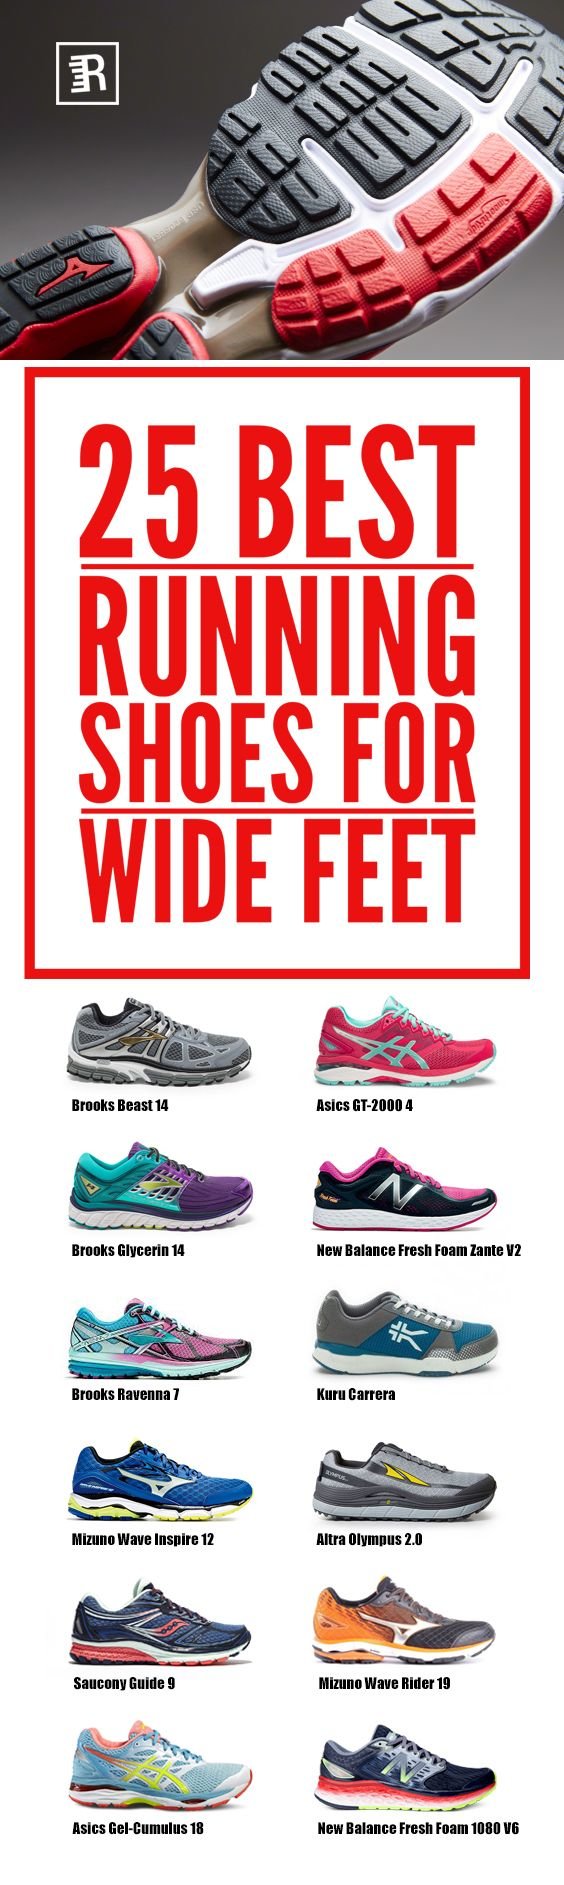 25 Best Running Shoes For Wide Feet 